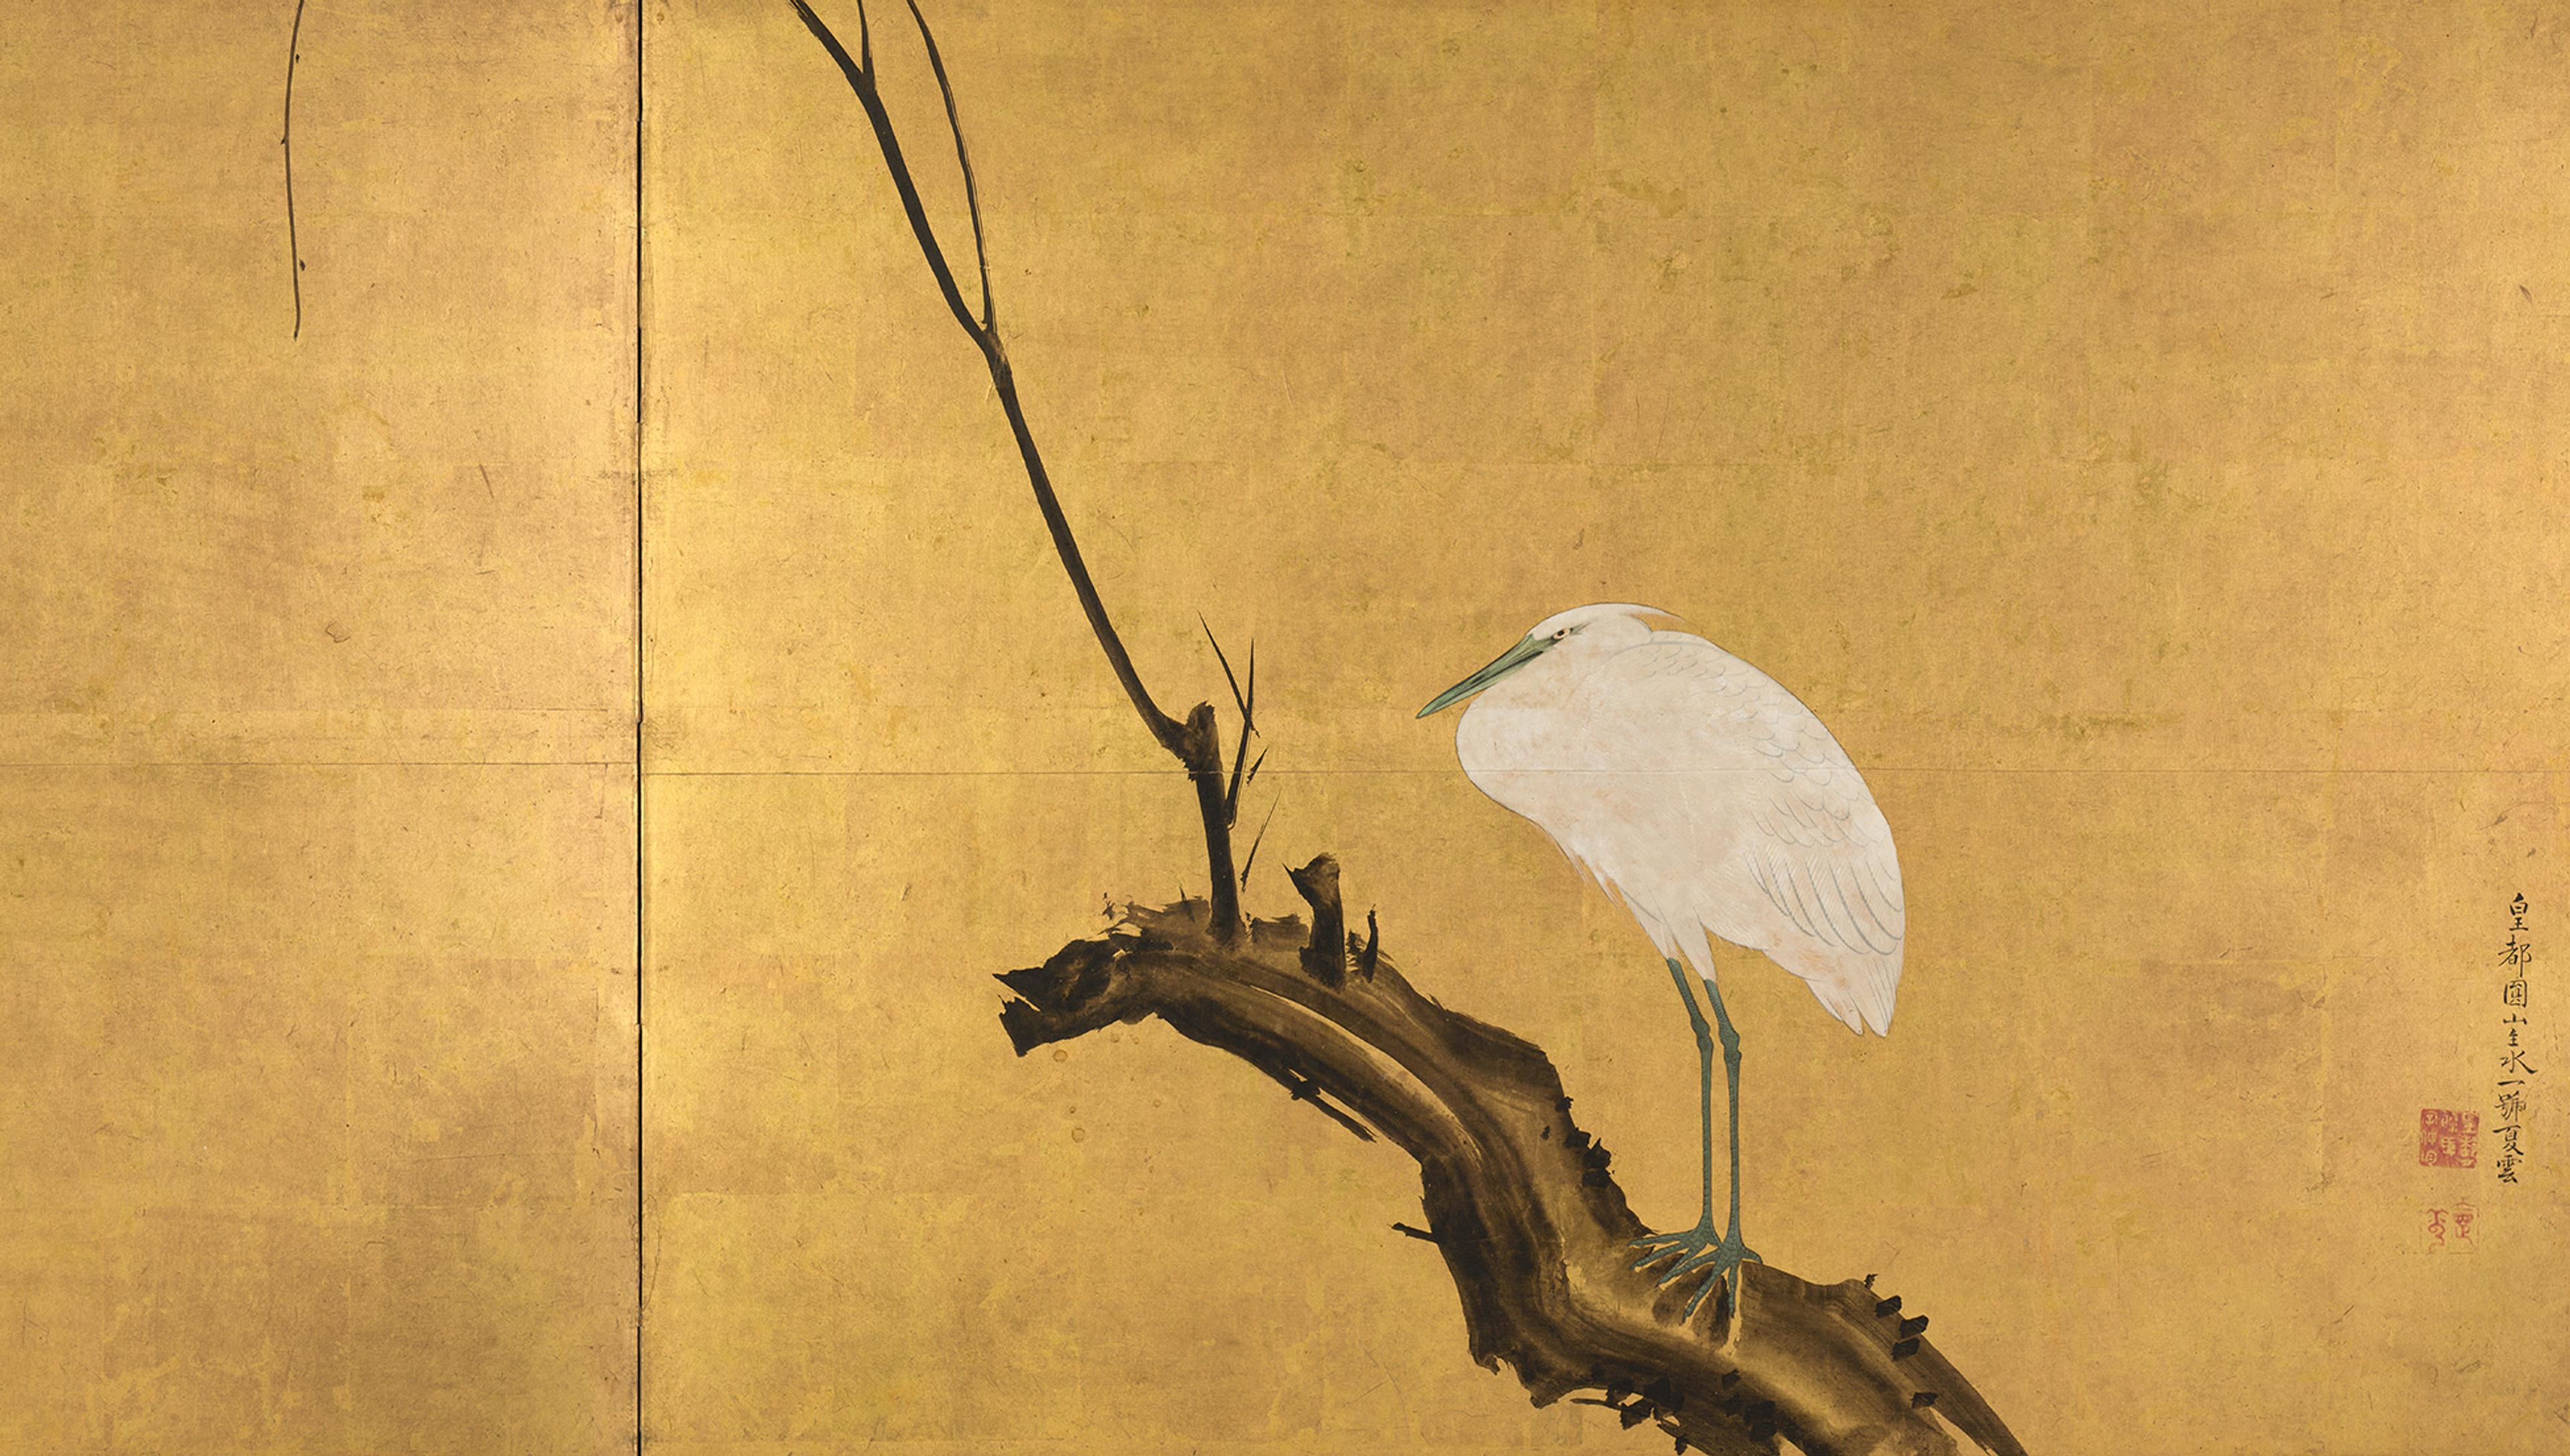 Painting of a heron perched on a branch against a gold background. The bird is depicted in fine detail with white feathers and a green beak, while the branch is rendered in dark, bold strokes. Traditional Asian calligraphy with red seals is present in the lower right corner.